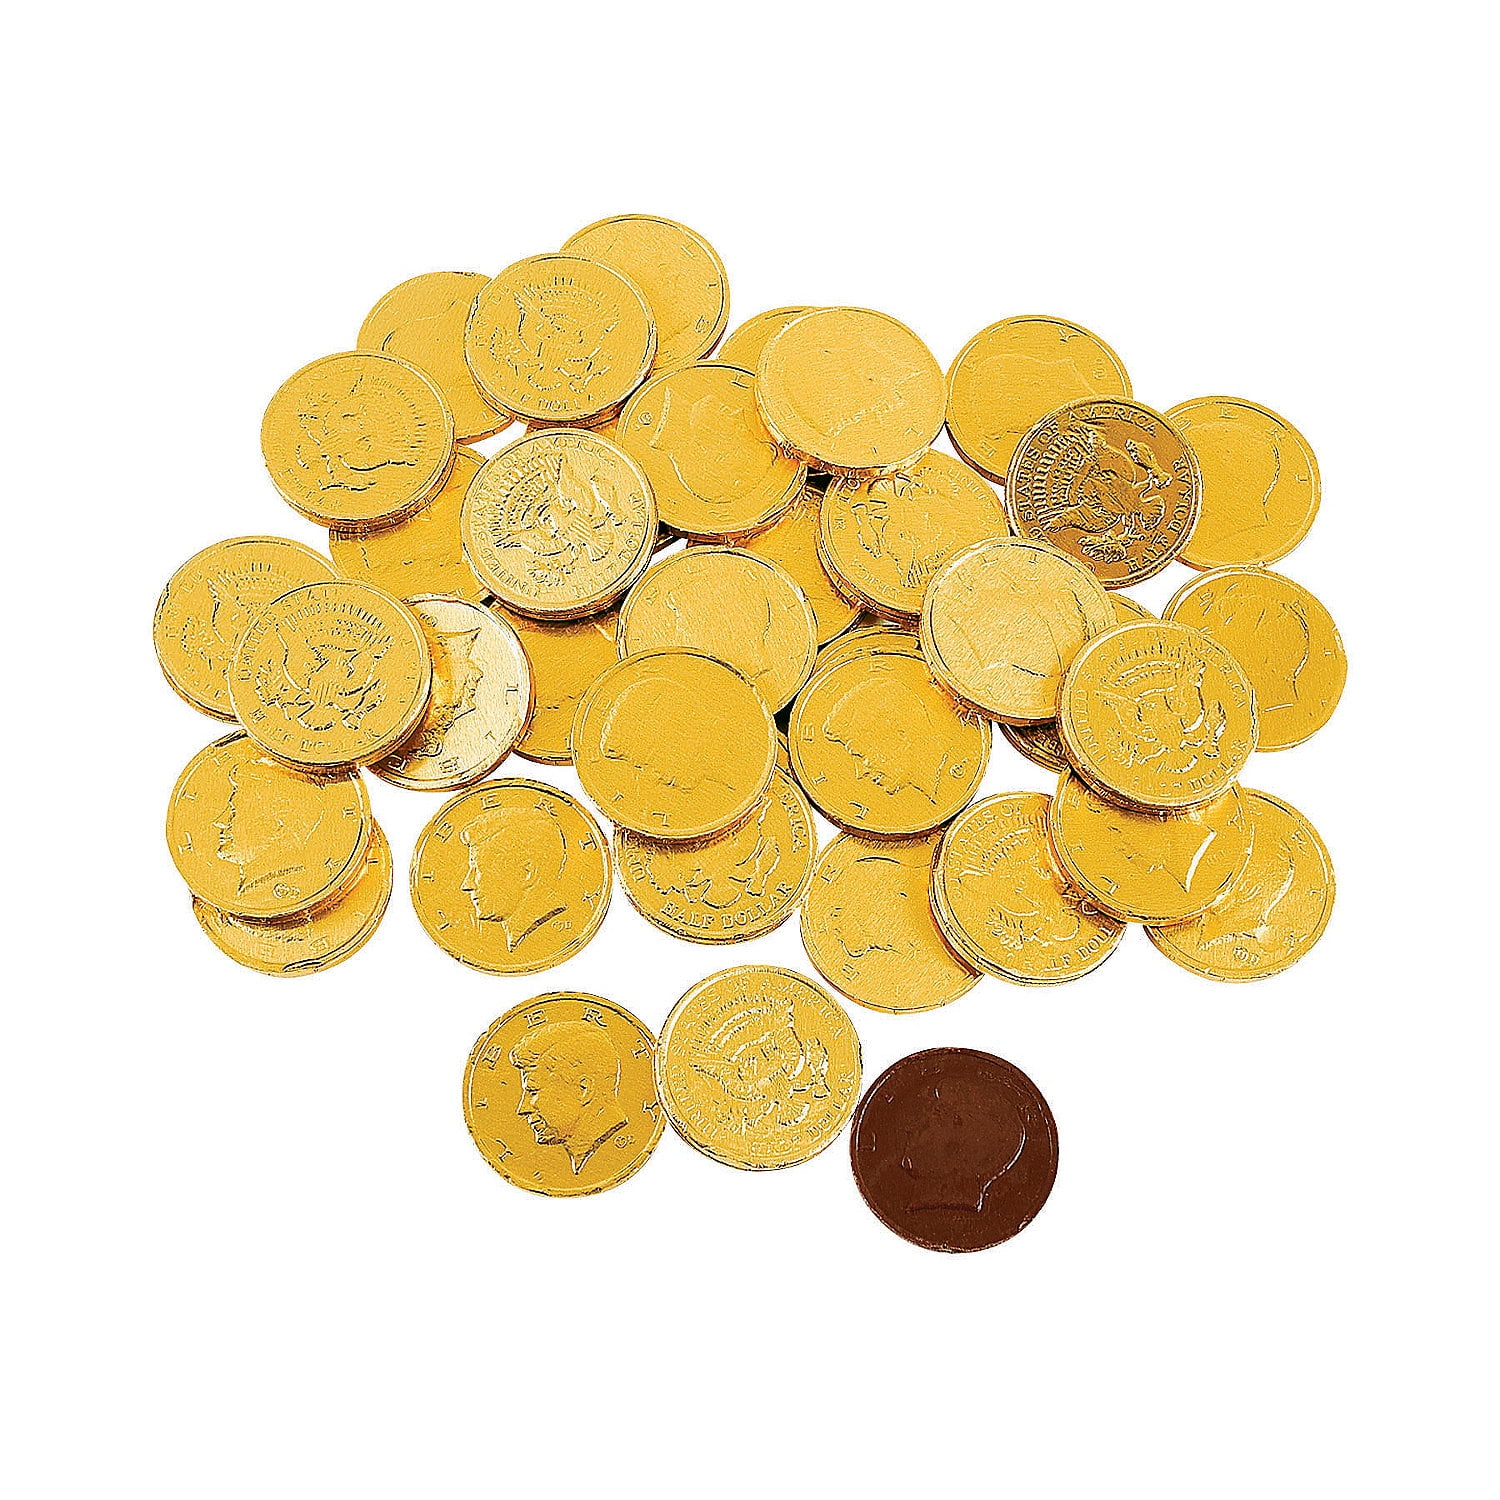 File:Chocolate-Gold-Coins.jpg - Wikipedia